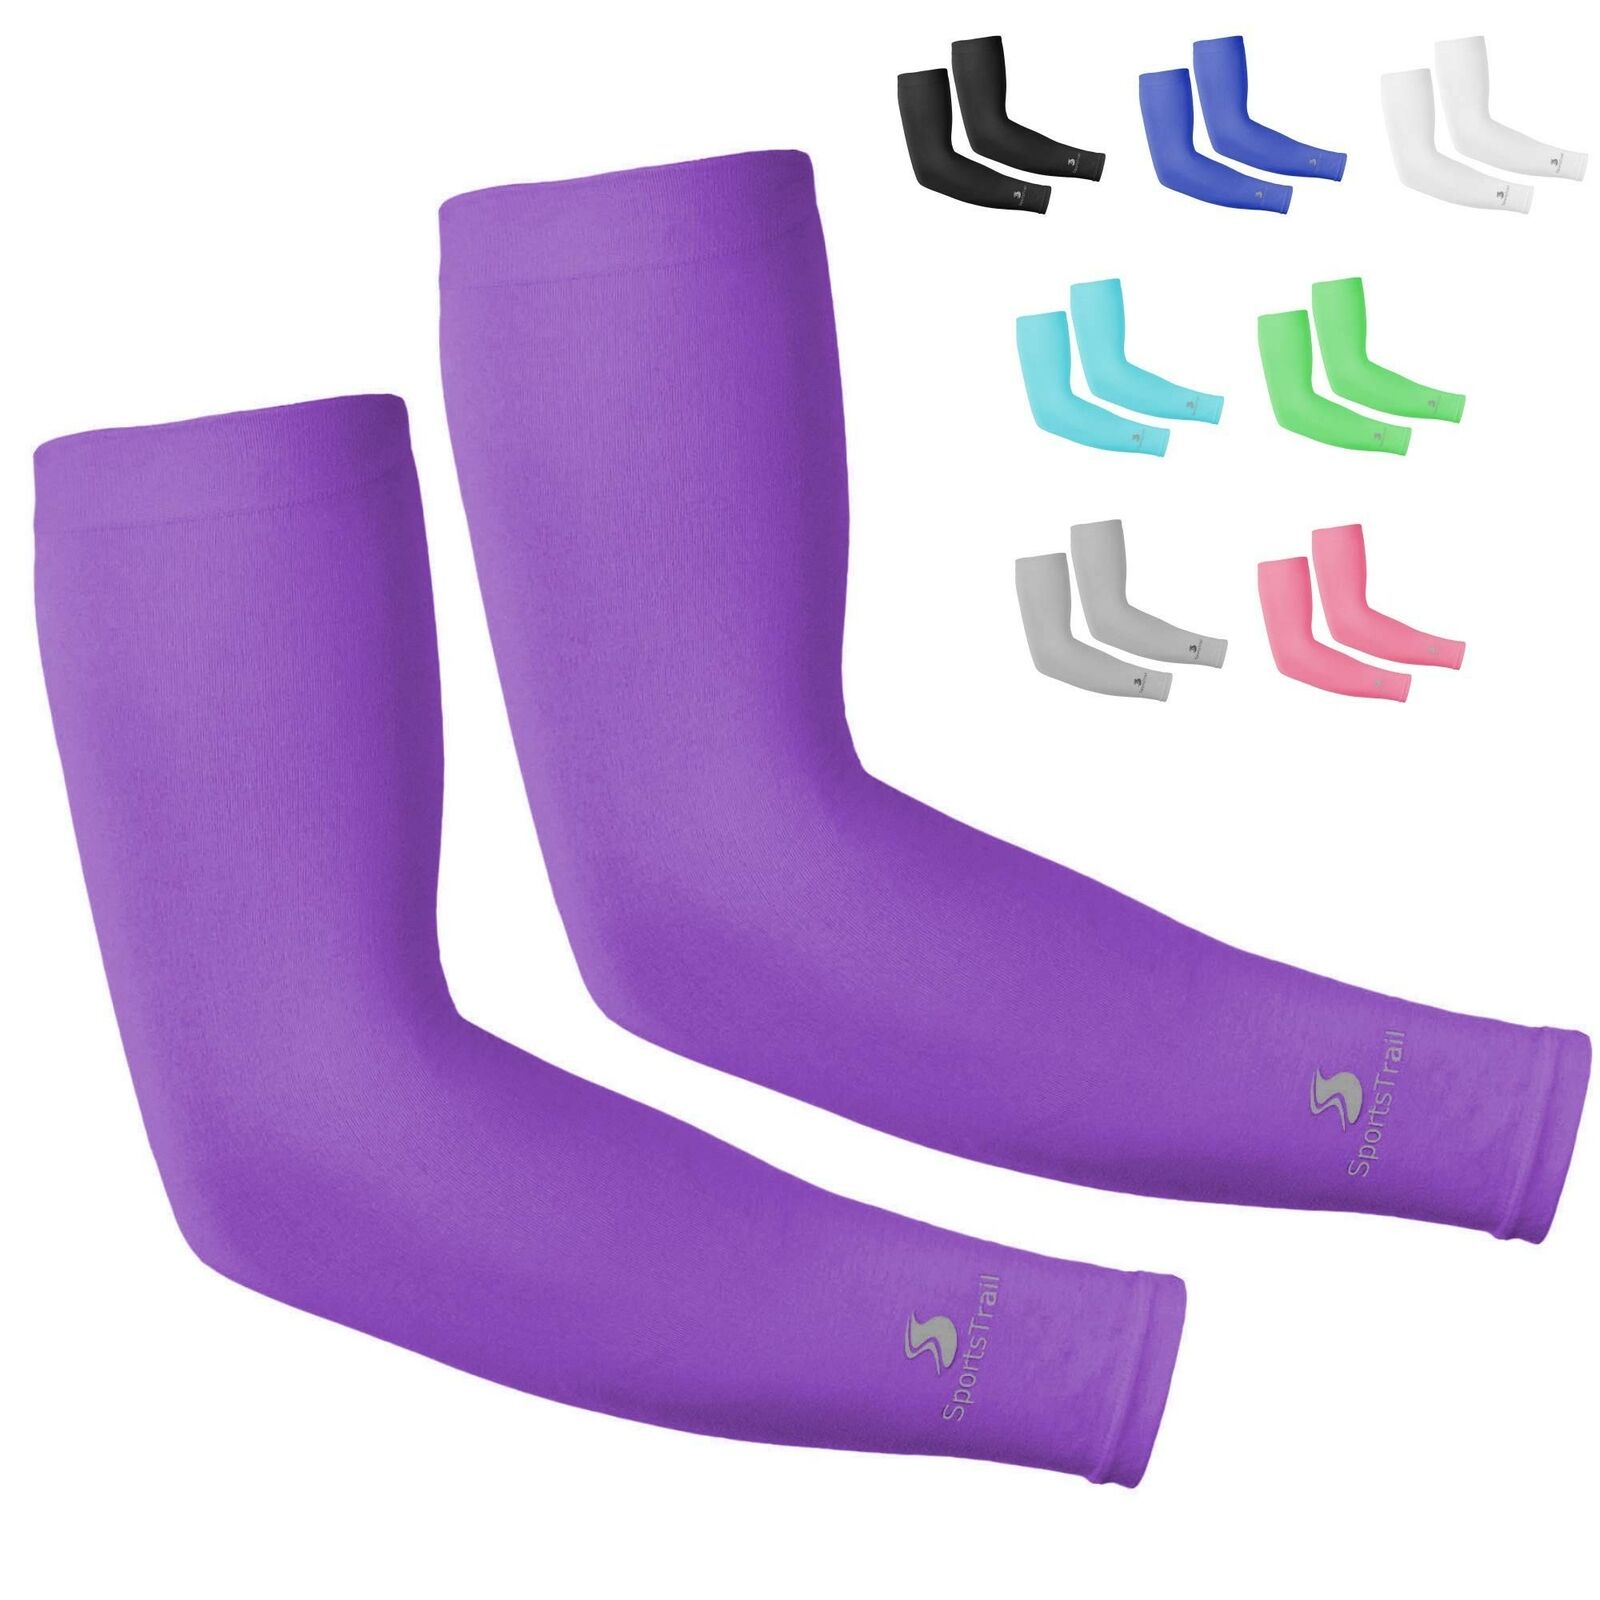 Cooling Arm Sleeves for Men & Women (1 pair), UV Protective UPF 50 Long Sun S...